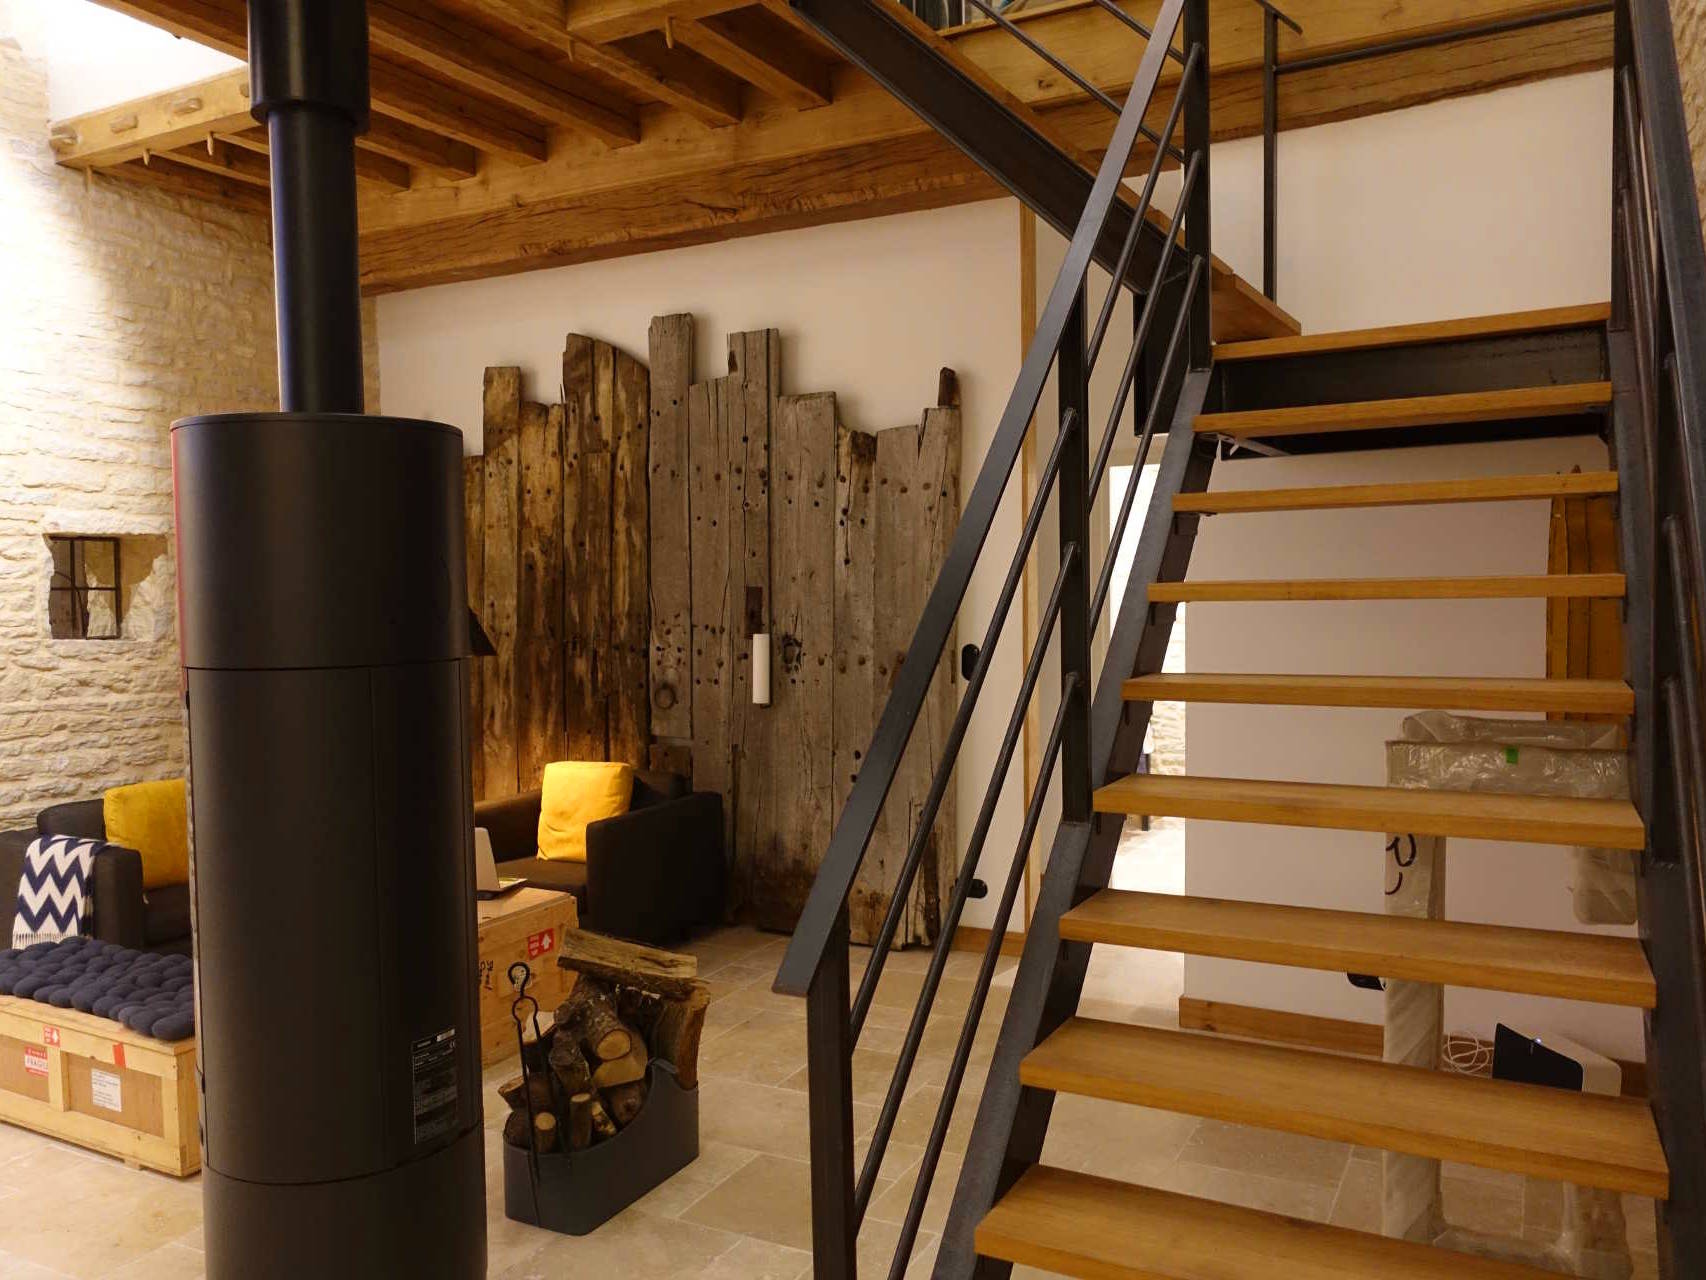 15th century barn conversion living area and stair to upper bedroom lofts